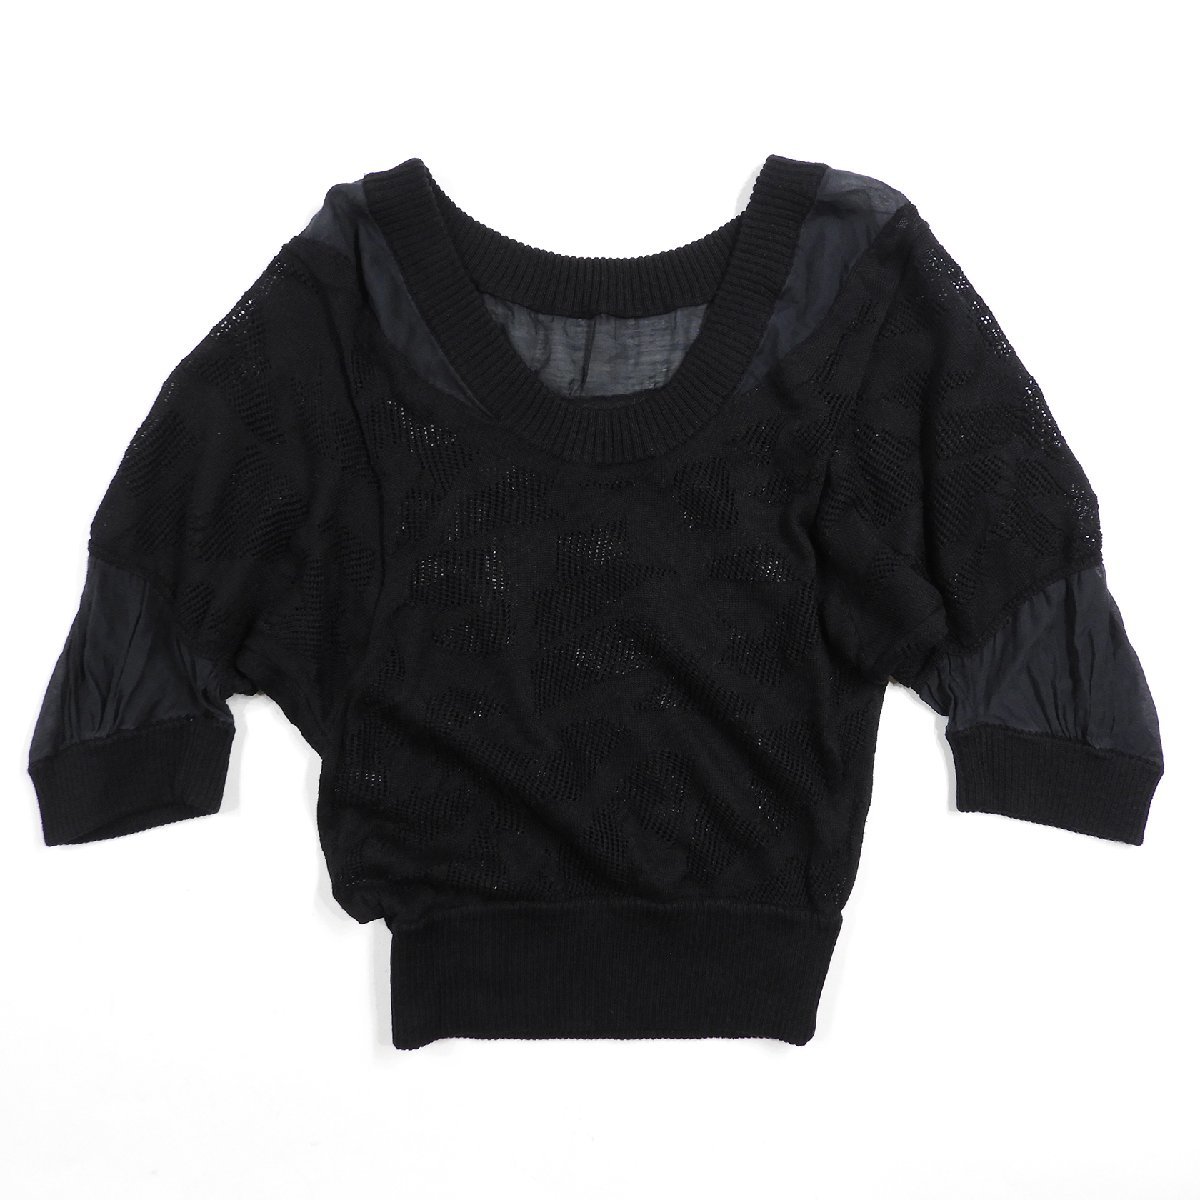 ANTEPRIMA Anteprima deformation knitted black #17036 postage 360 jpy tops lady's casual sweater 